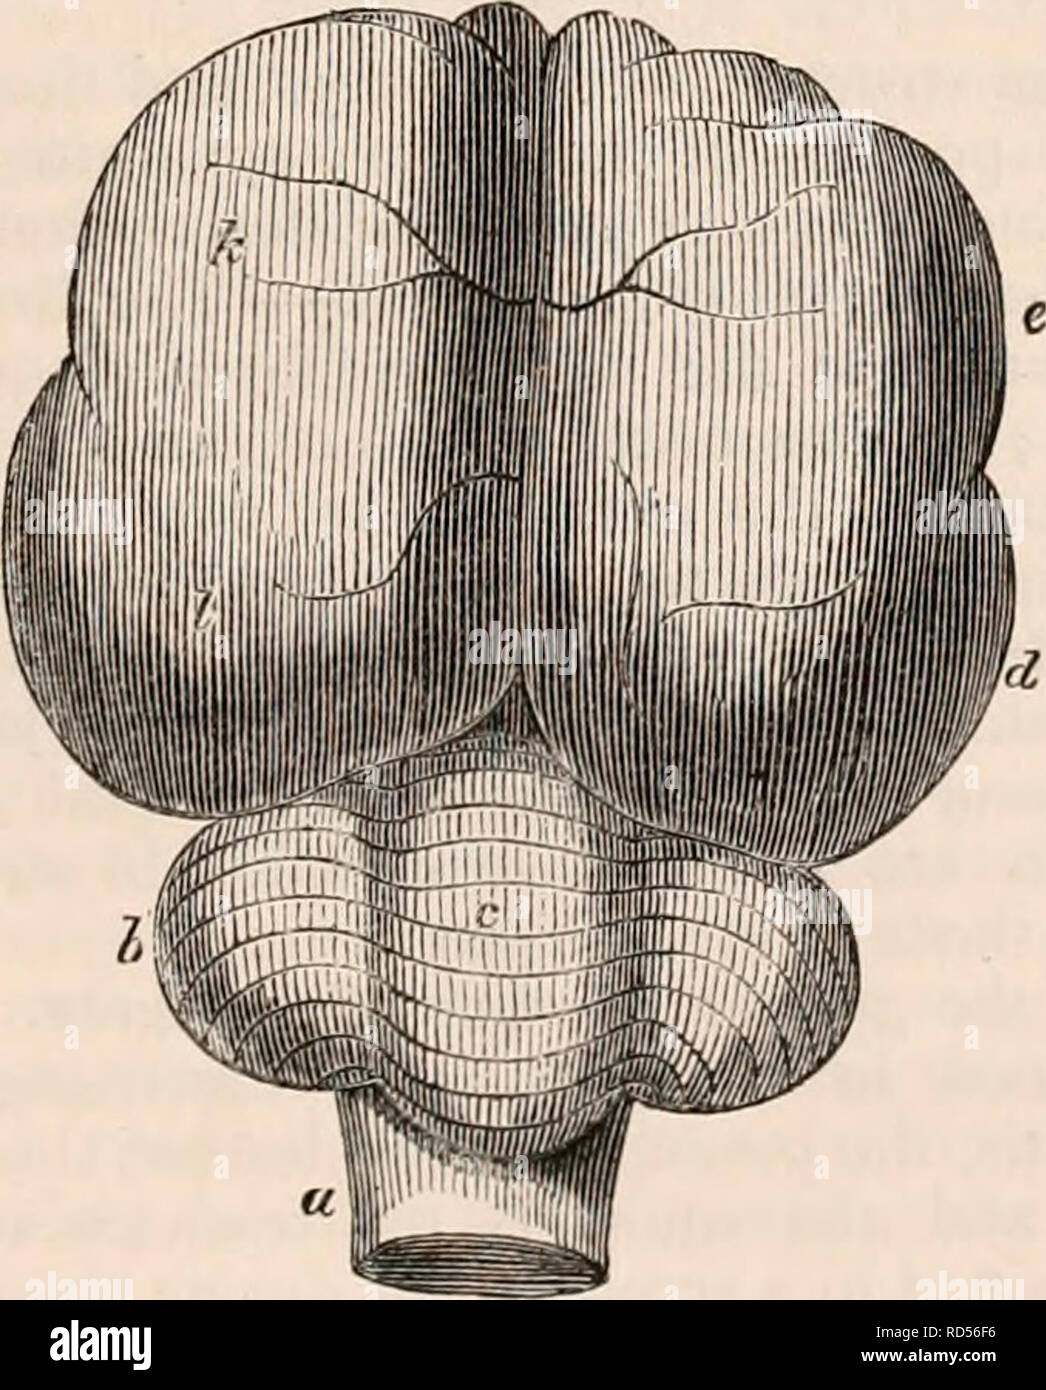 . The cyclopædia of anatomy and physiology. Anatomy; Physiology; Zoology. RODENTIA. 391 through an ascending canal, which enters the cavit} of the skull close to the sella turcica, arriving at the brain much in the same manner as the internal carotid of the human subject. This branch is smaller than the vertebral artery. The other or external branch enters the cranium through a canal that opens upon the anterior surface of the petrous bone, and divides into the middle meningeal and ophthal- mic arteries. In the dormouse the distribution of the internal carotid very nearly resembles what is des Stock Photo